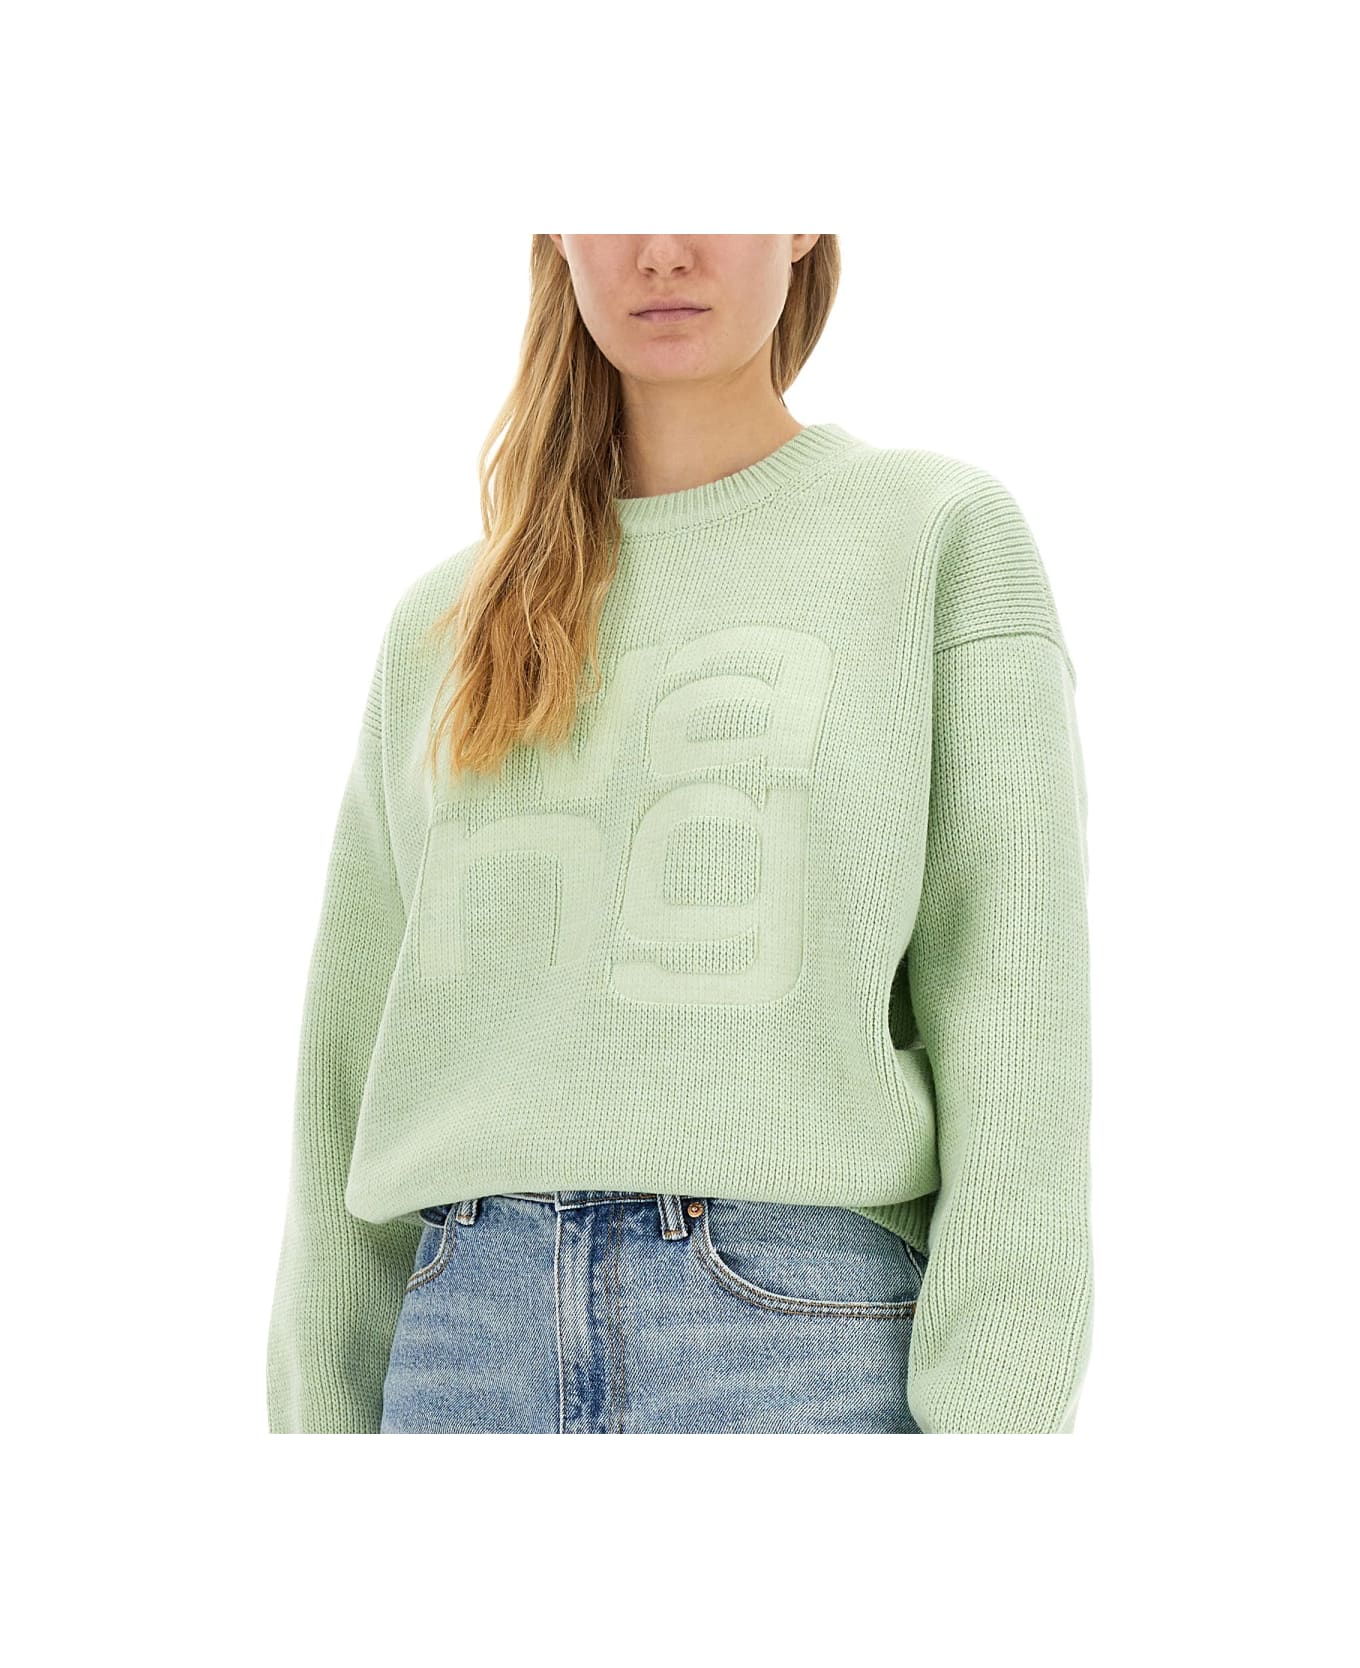 Alexander Wang Jersey With Logo - Pale Mint